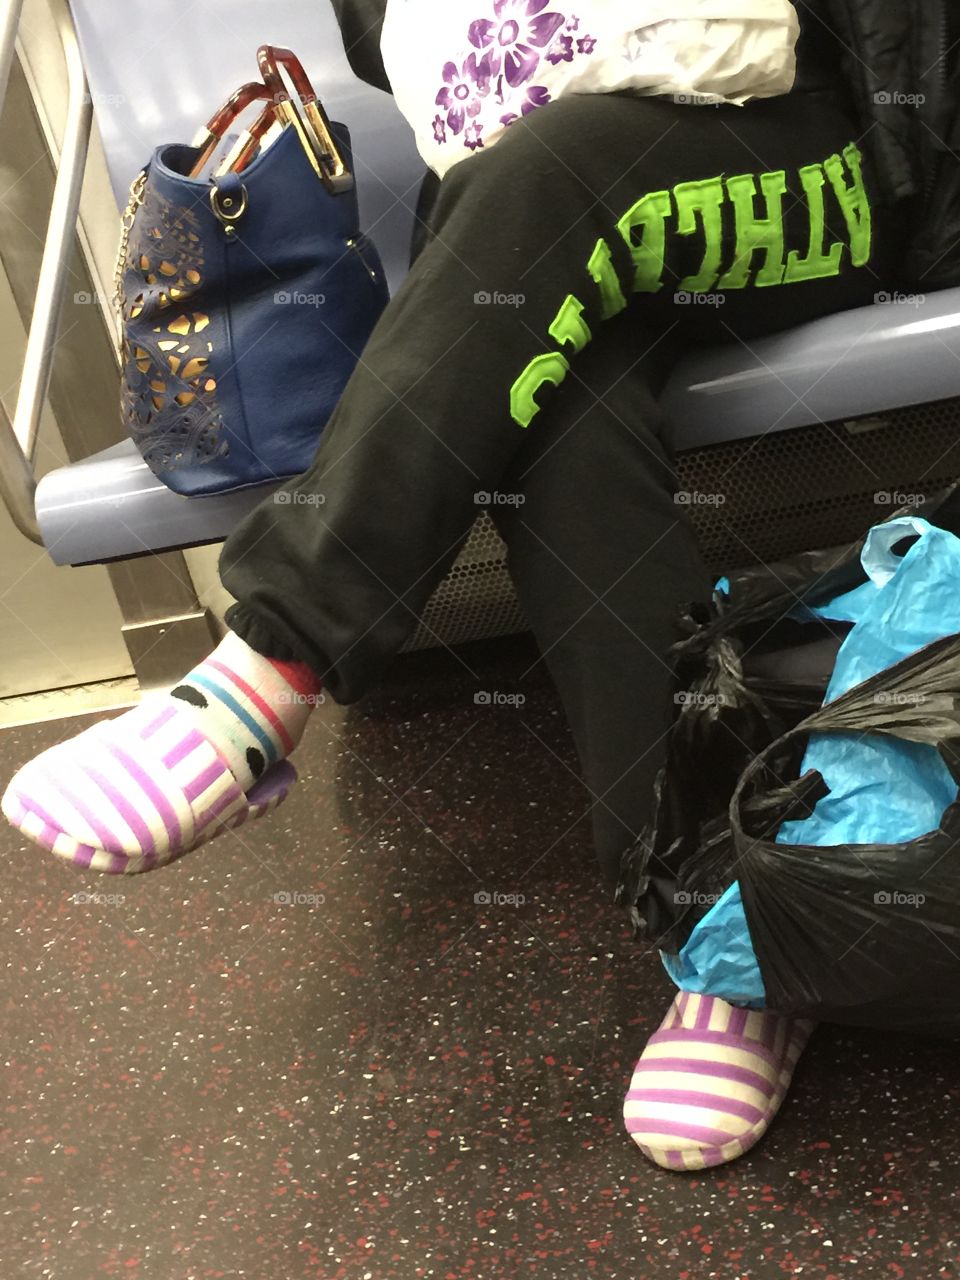 Slipper-ing on the Subway. Woman, relatively clean, wearing her most comfortable shoes on the Manhattan subway.